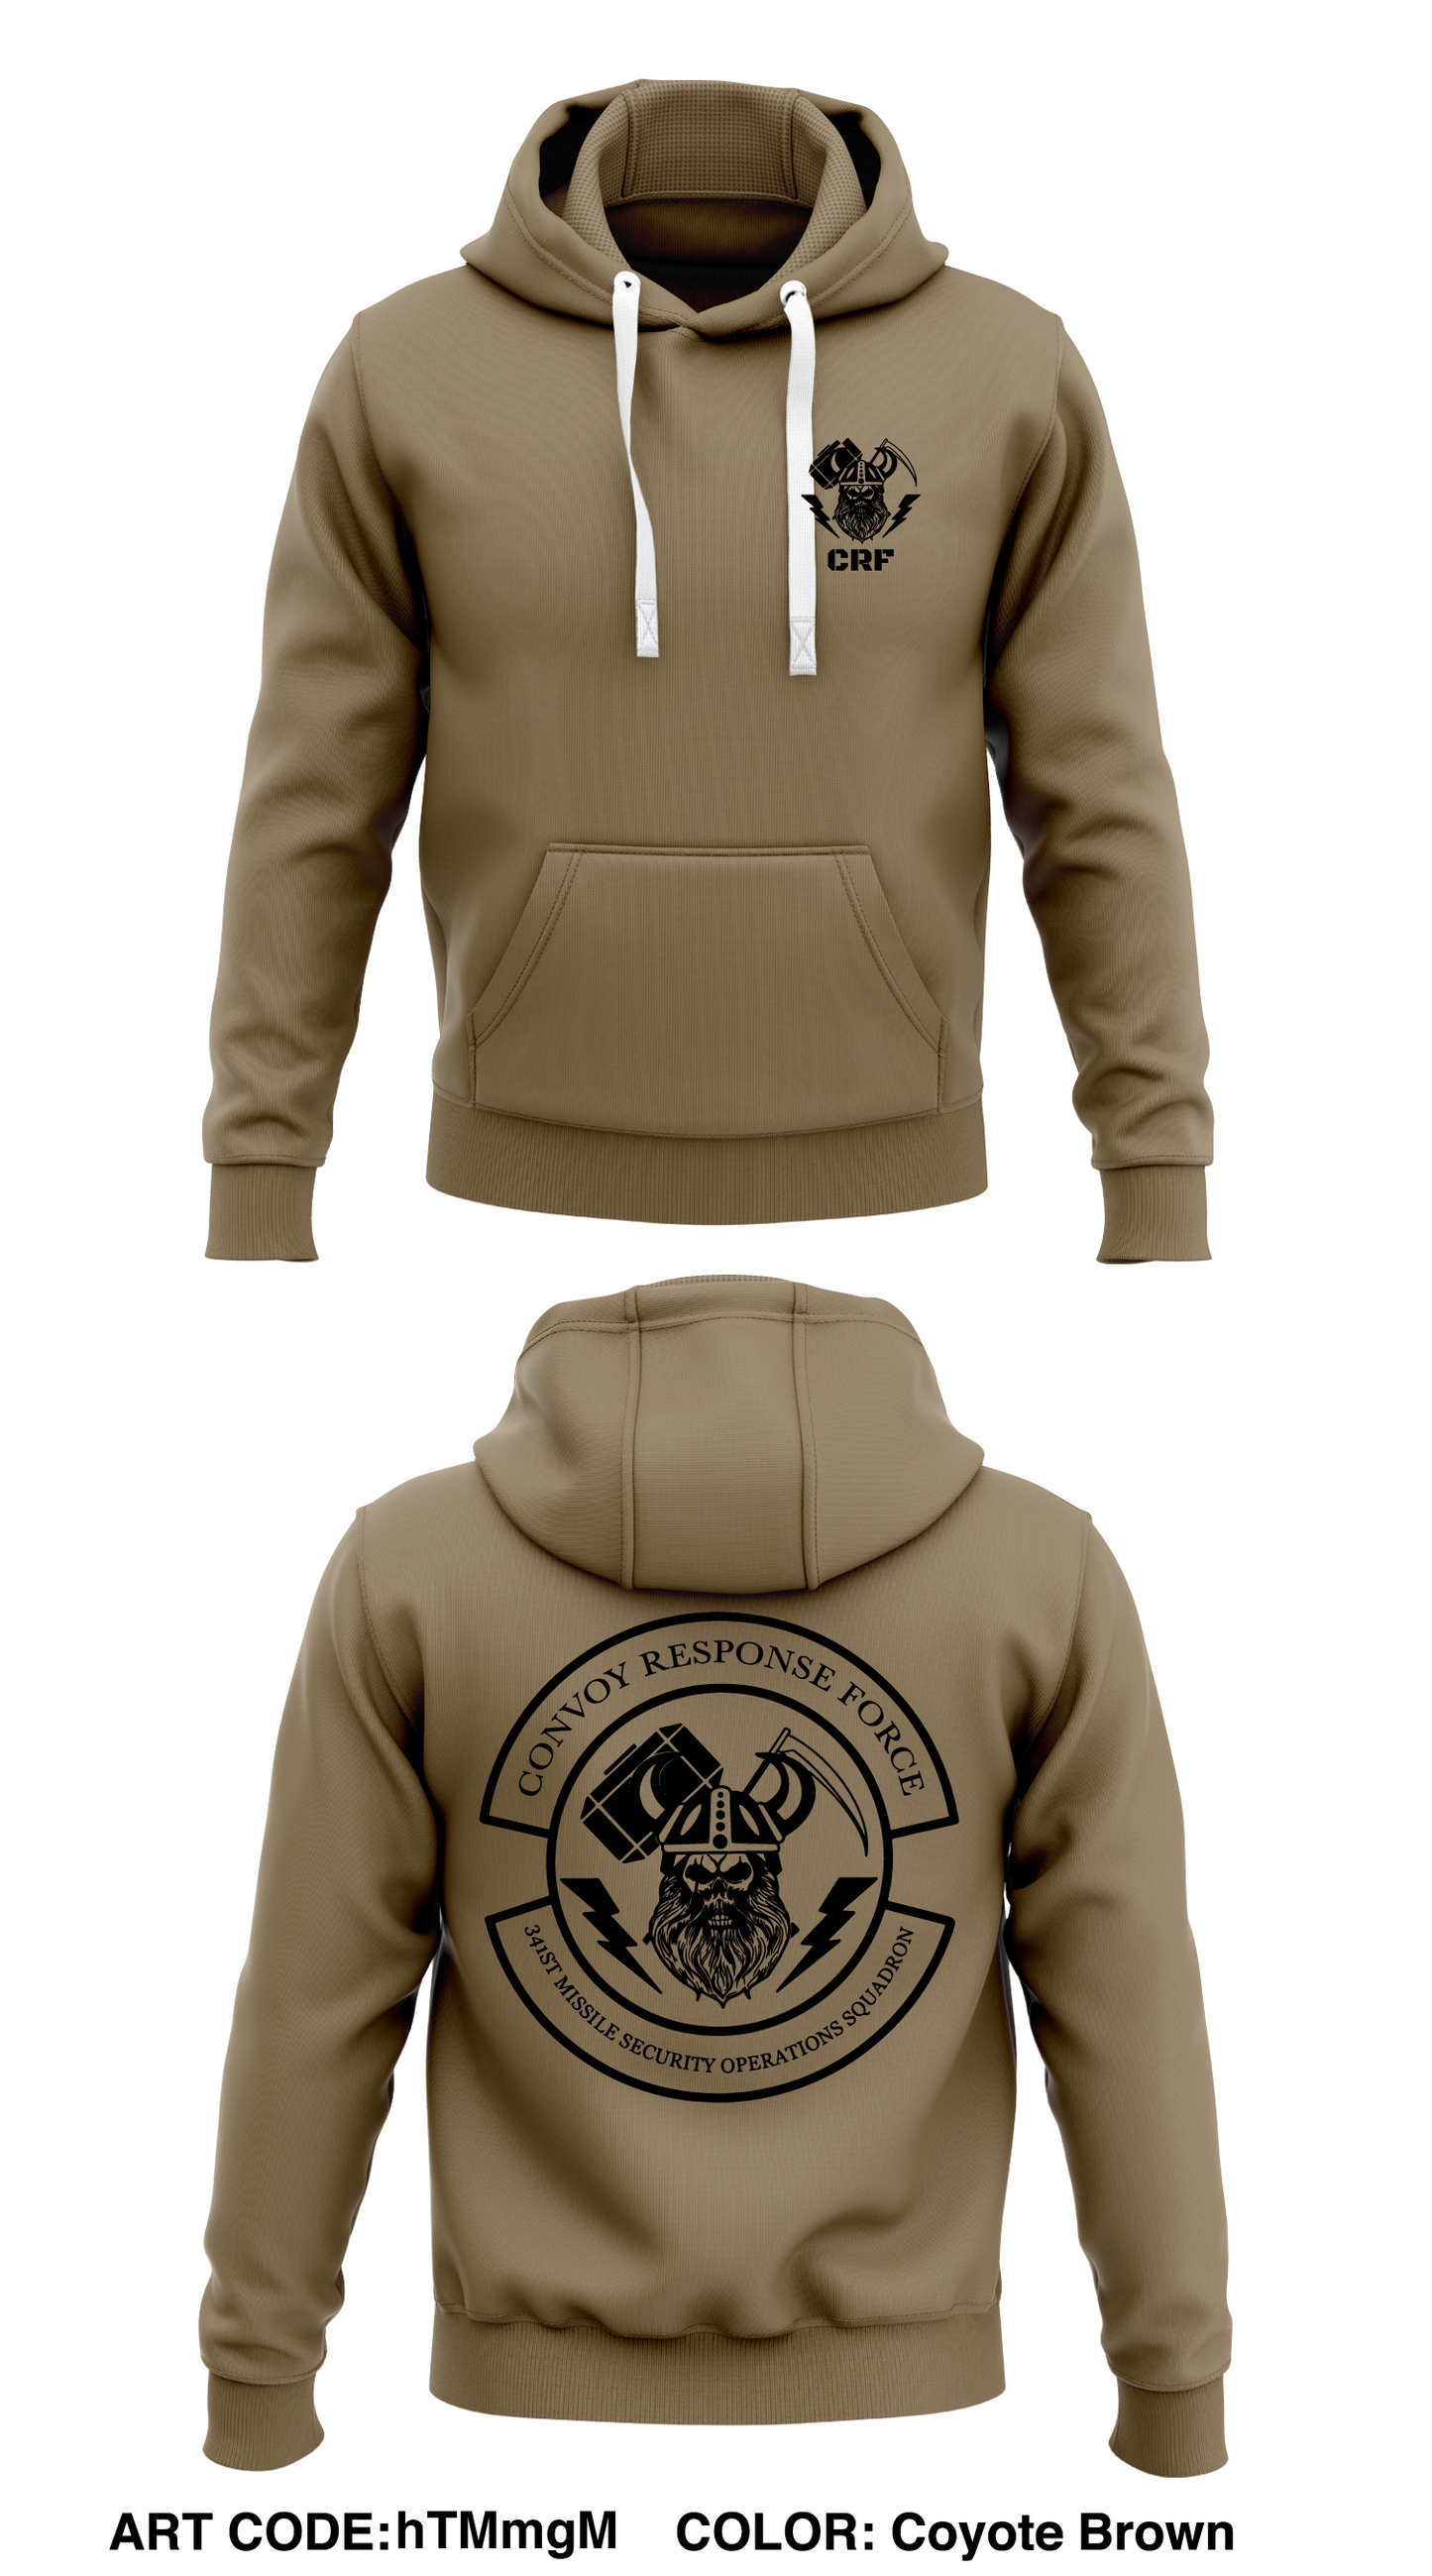 341st Missile Security Operations Squadron Store 1  Core Men's Hooded Performance Sweatshirt - hTMmgM